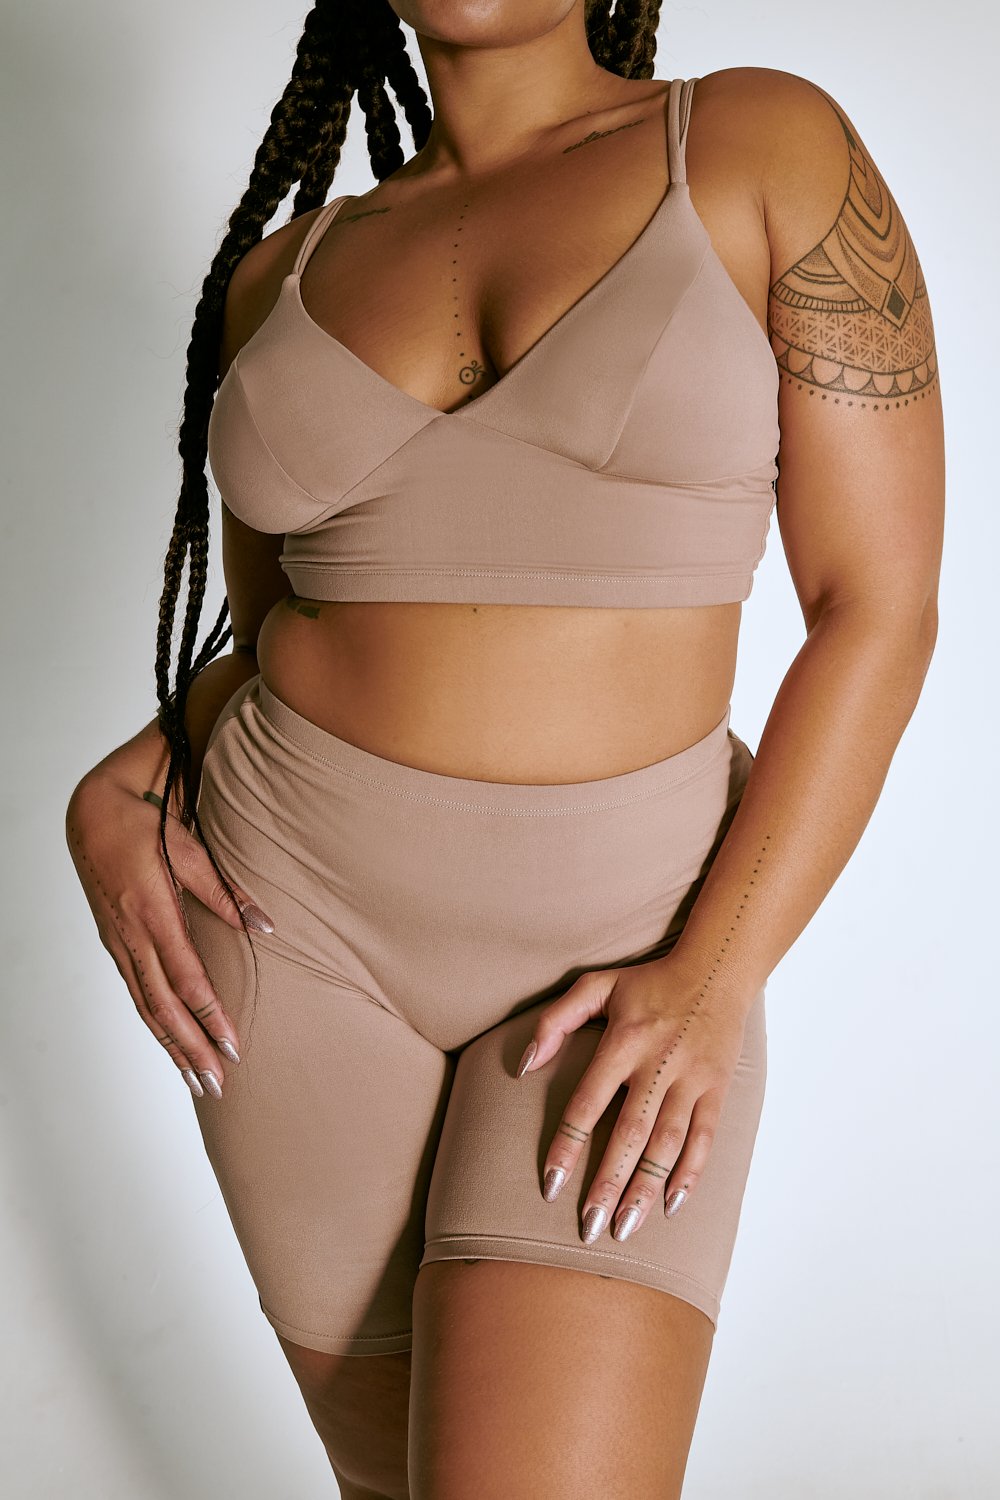 Creatures of XIX LuxLounge Triangle Top - Taupe-Creatures of XIX-Pole Junkie